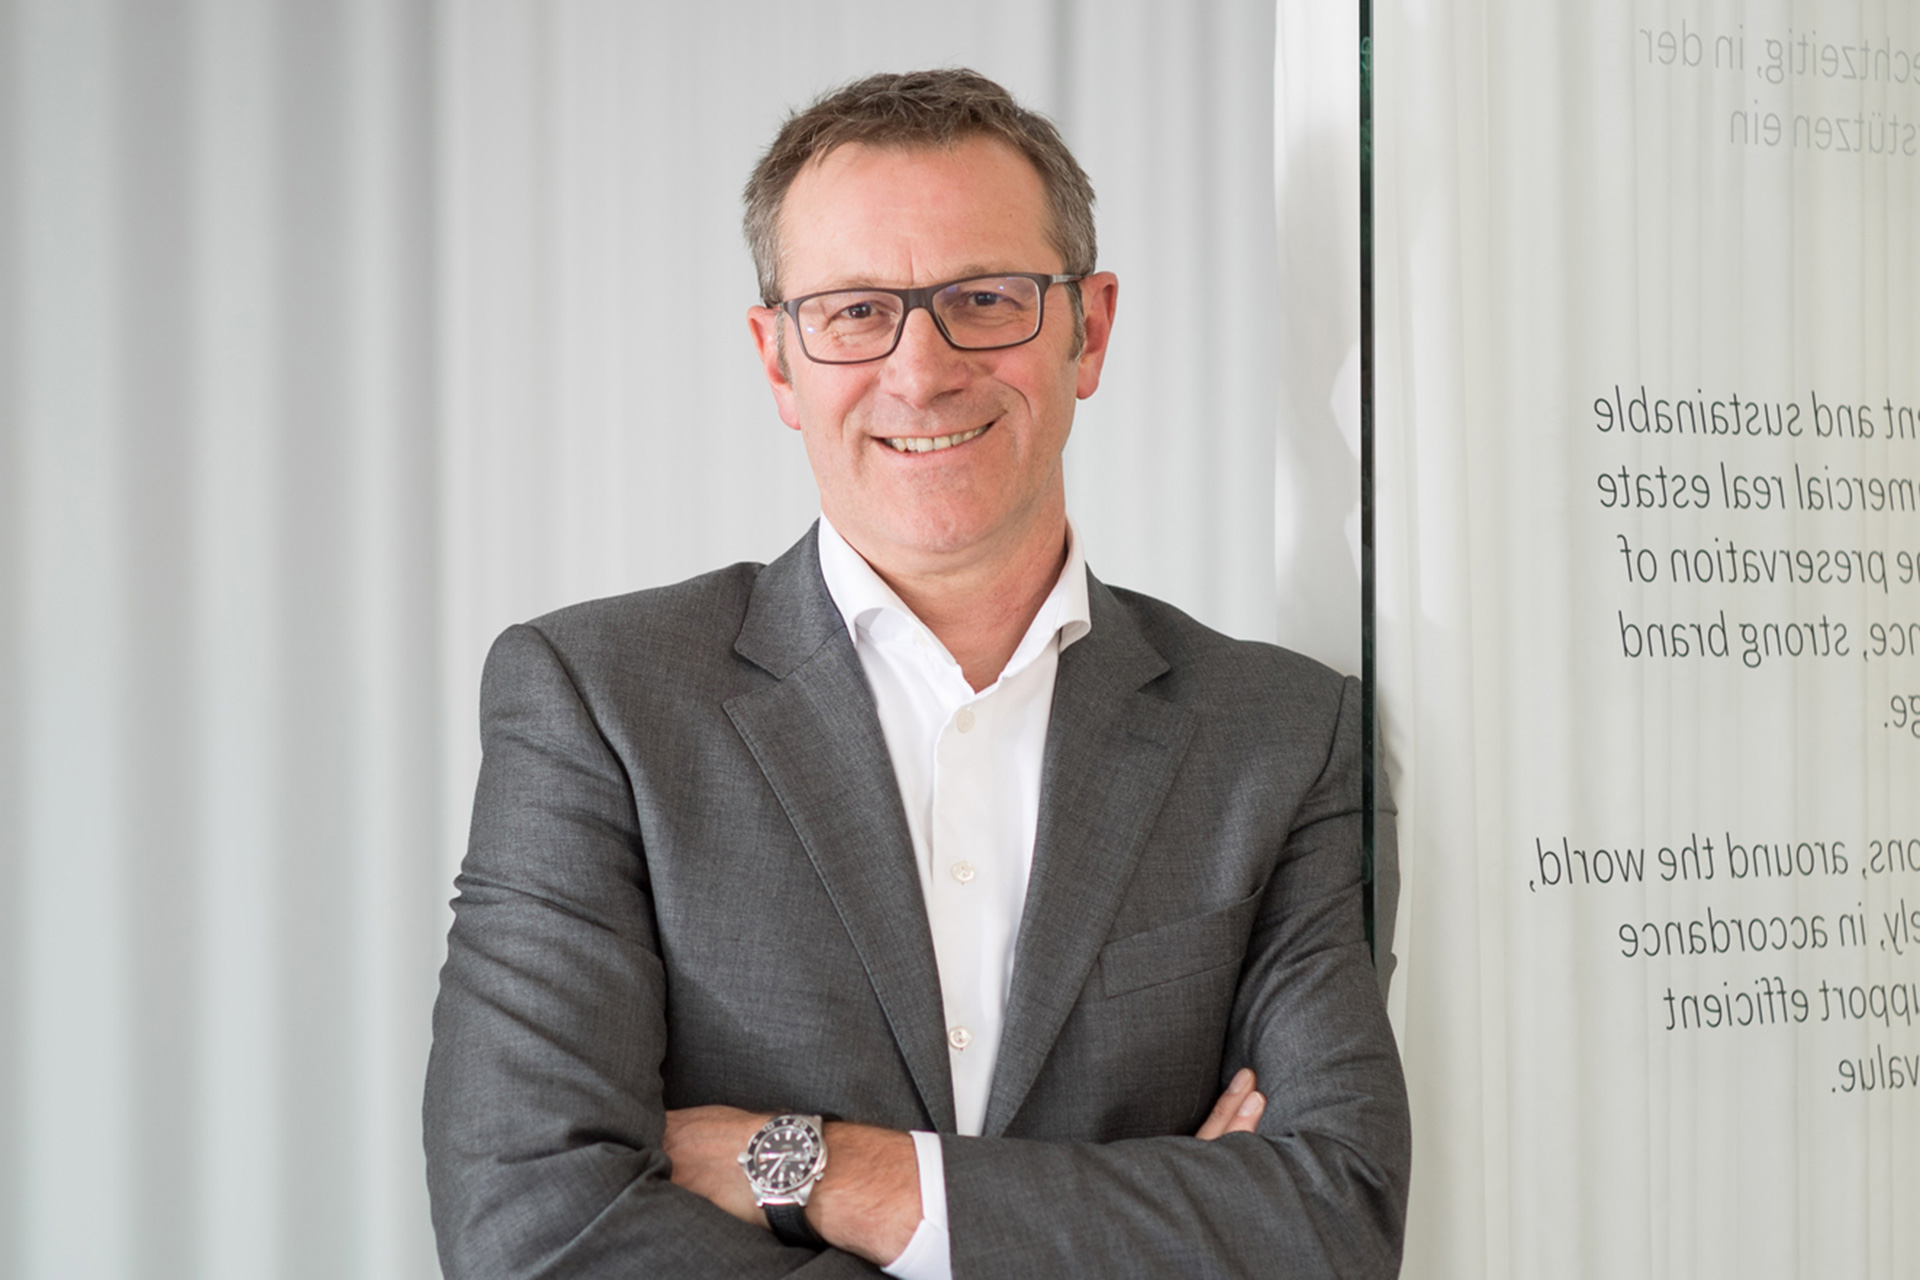 Portrait view of Rolf Najork, Member of the Board of Management of Robert Bosch GmbH